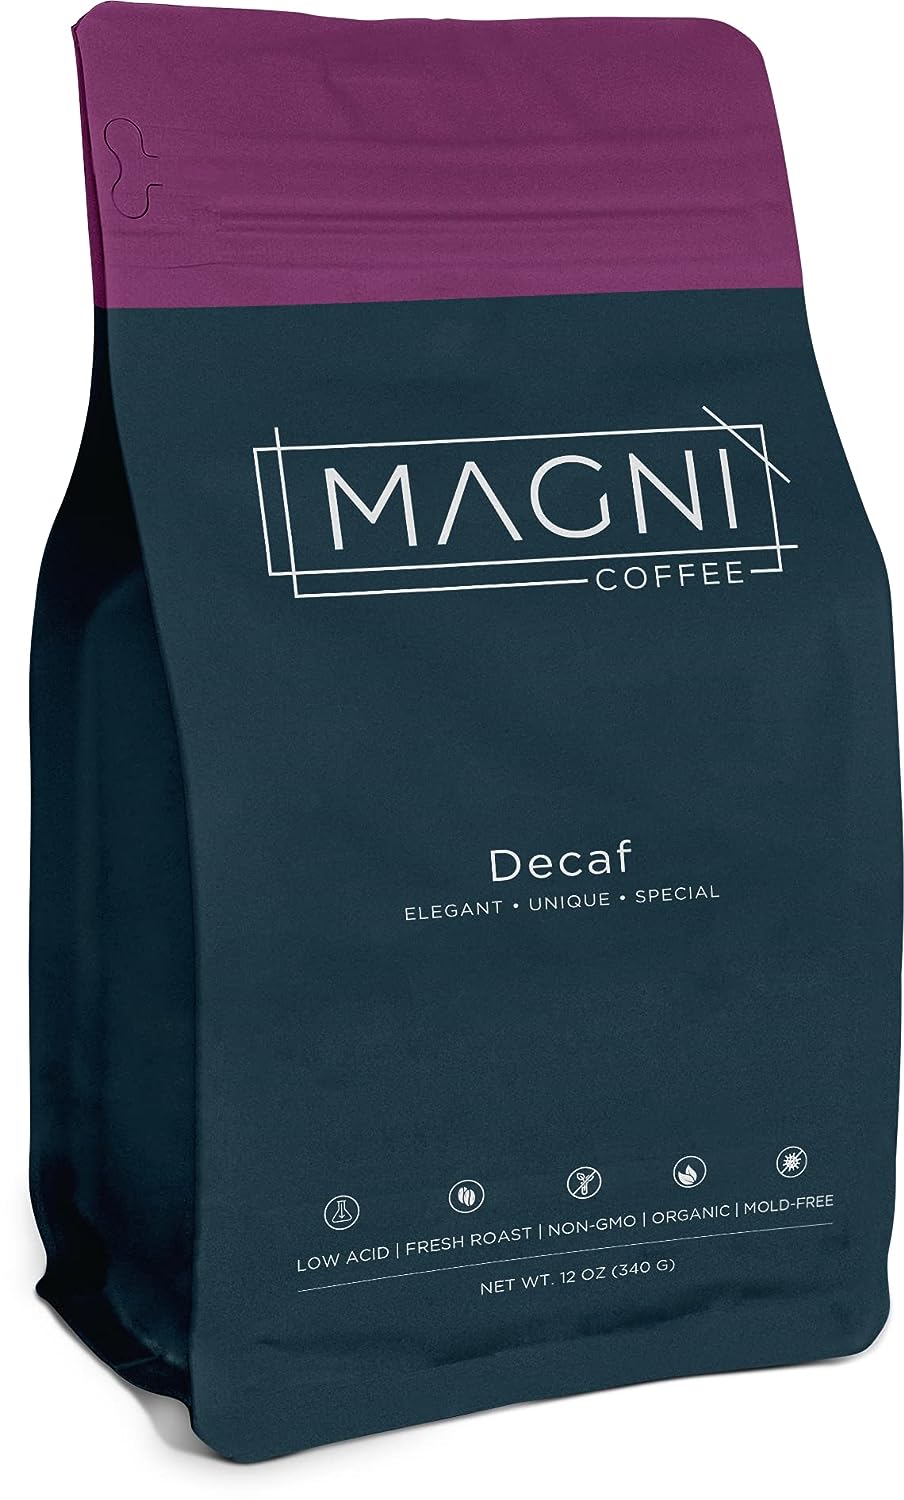 Low Acid Coffee - Organic Coffee - Ground and Whole Beans for French Press, Espresso, Pourover - Non-GMO - Mold Free  - Single Origin Coffee - Magni Coffee (WHOLE BEANS Decaf)